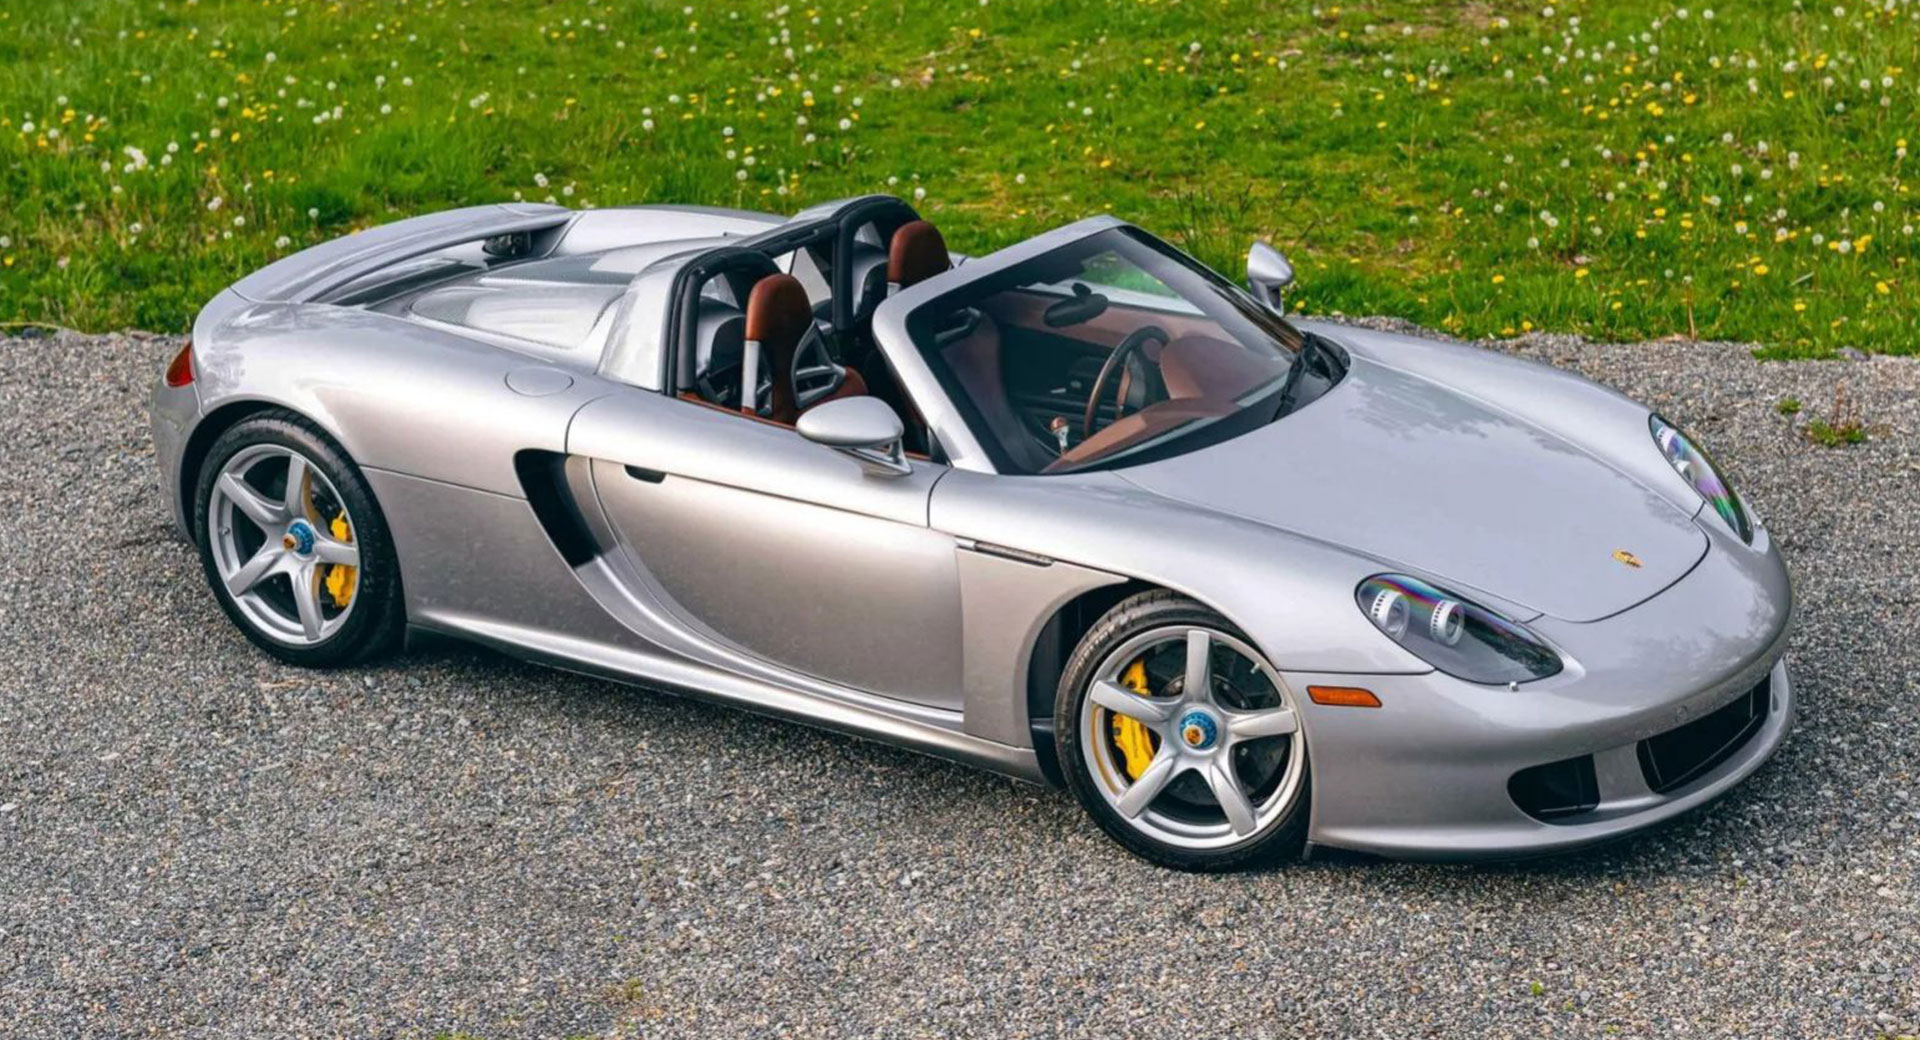 Yet Another Low-Mileage Porsche Carrera GT Has Hit The Market | Carscoops